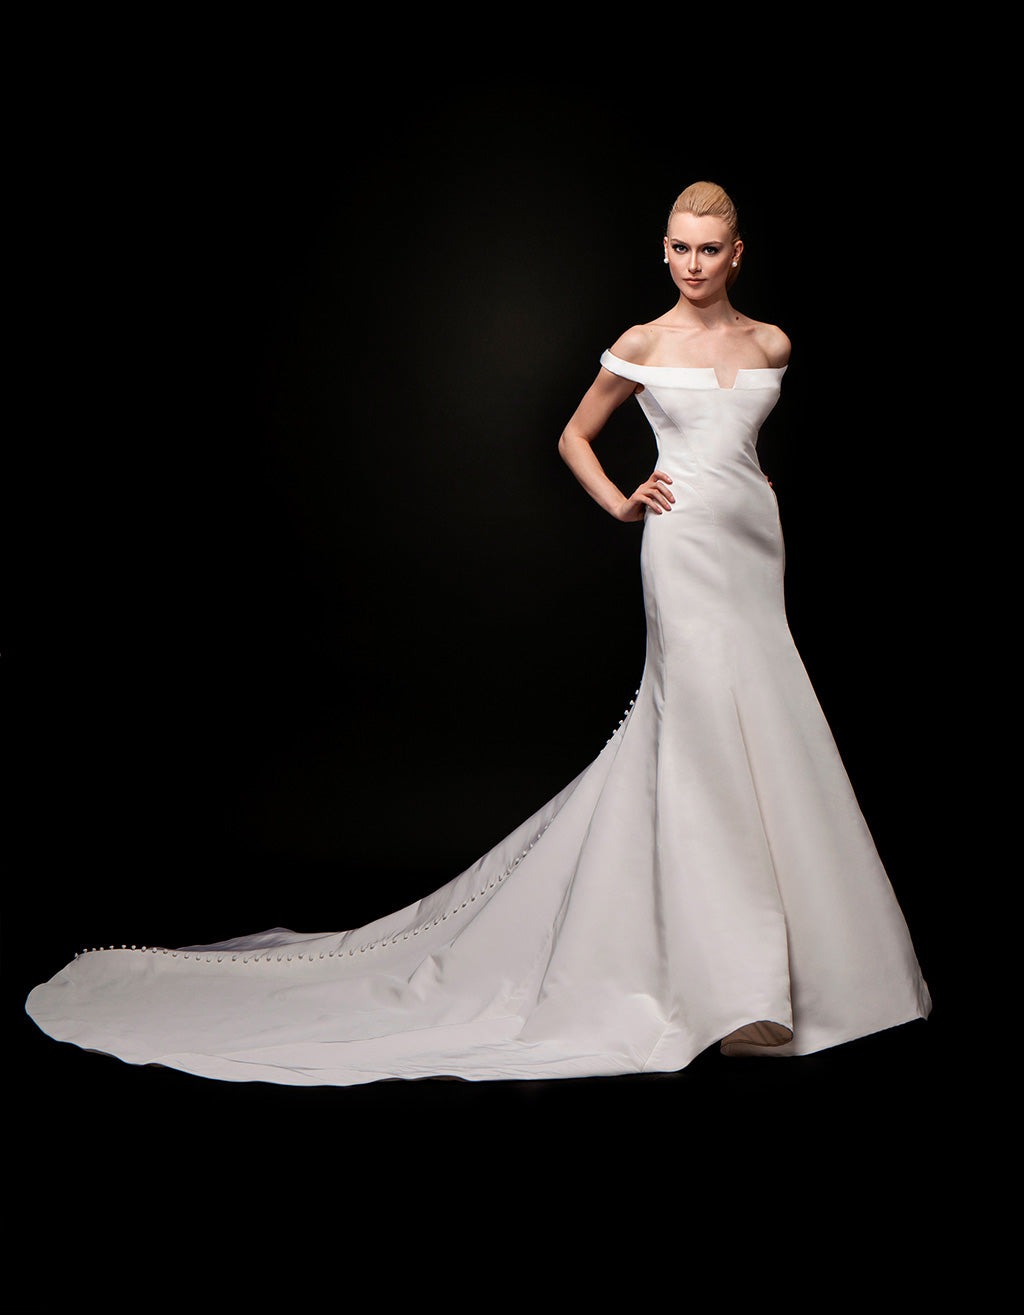 Bridal Gowns Online | Couture Bridal Gowns | Wedding Gowns for Sale ...